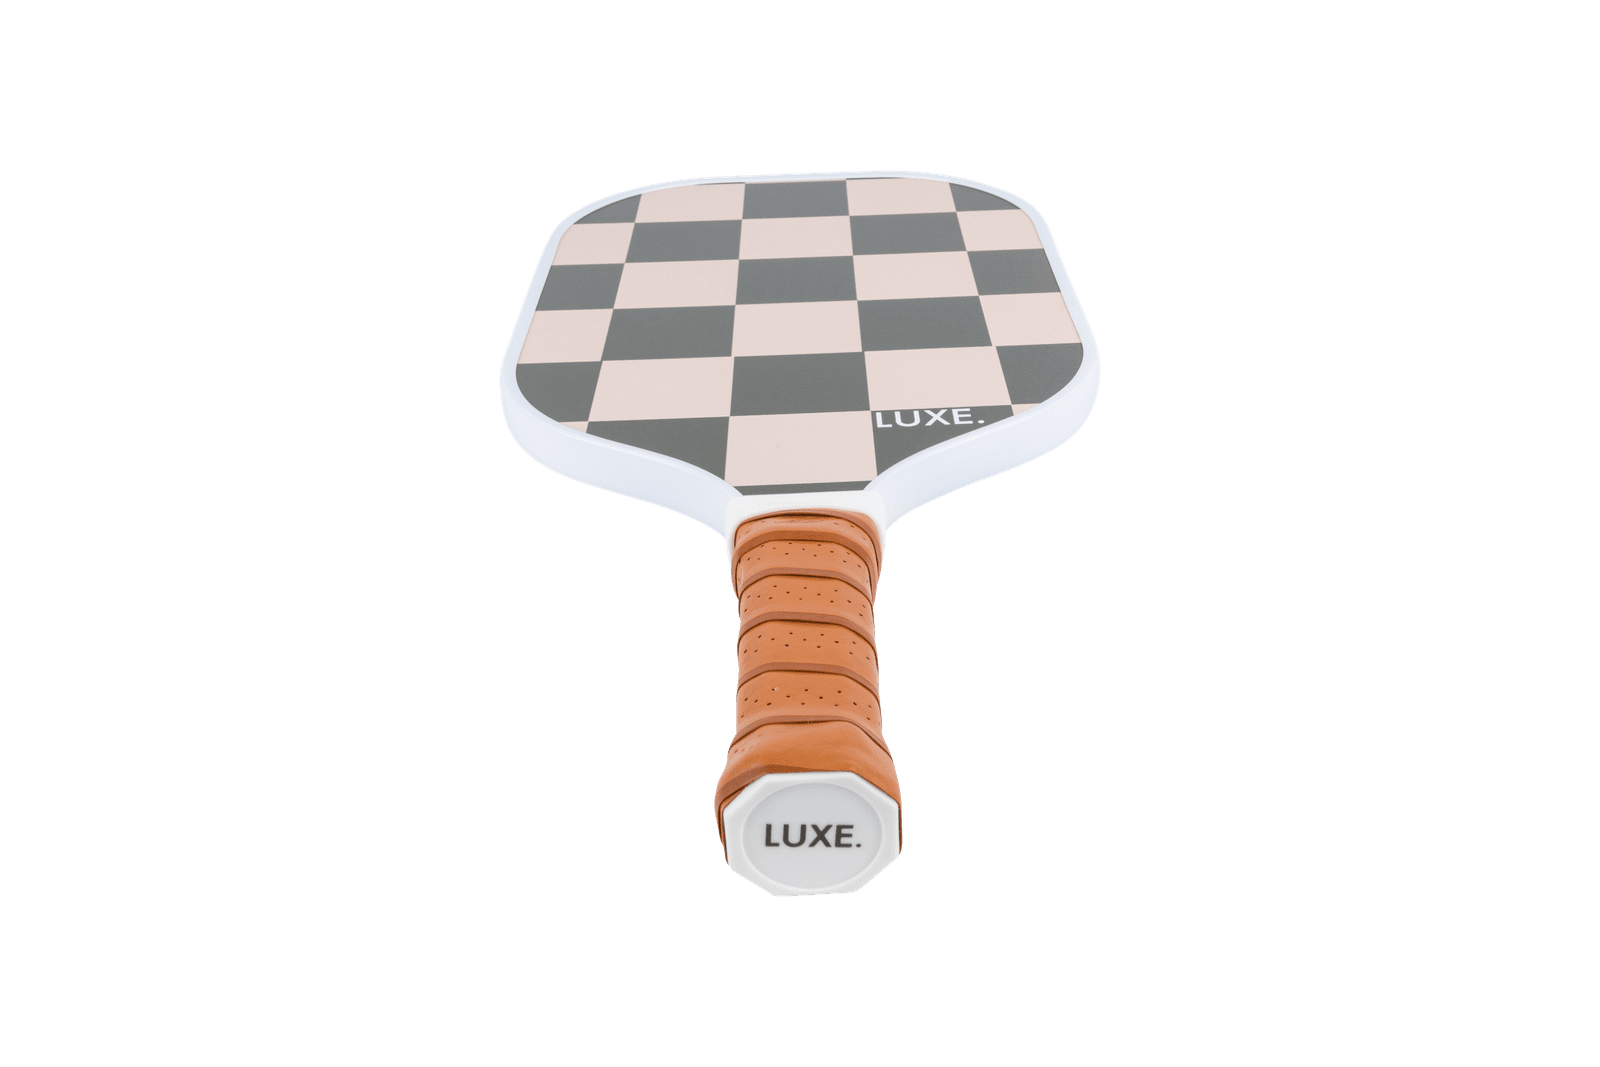 Checkmate LUXE Pickleball Paddle. Cute and aesthetic pickleball paddles